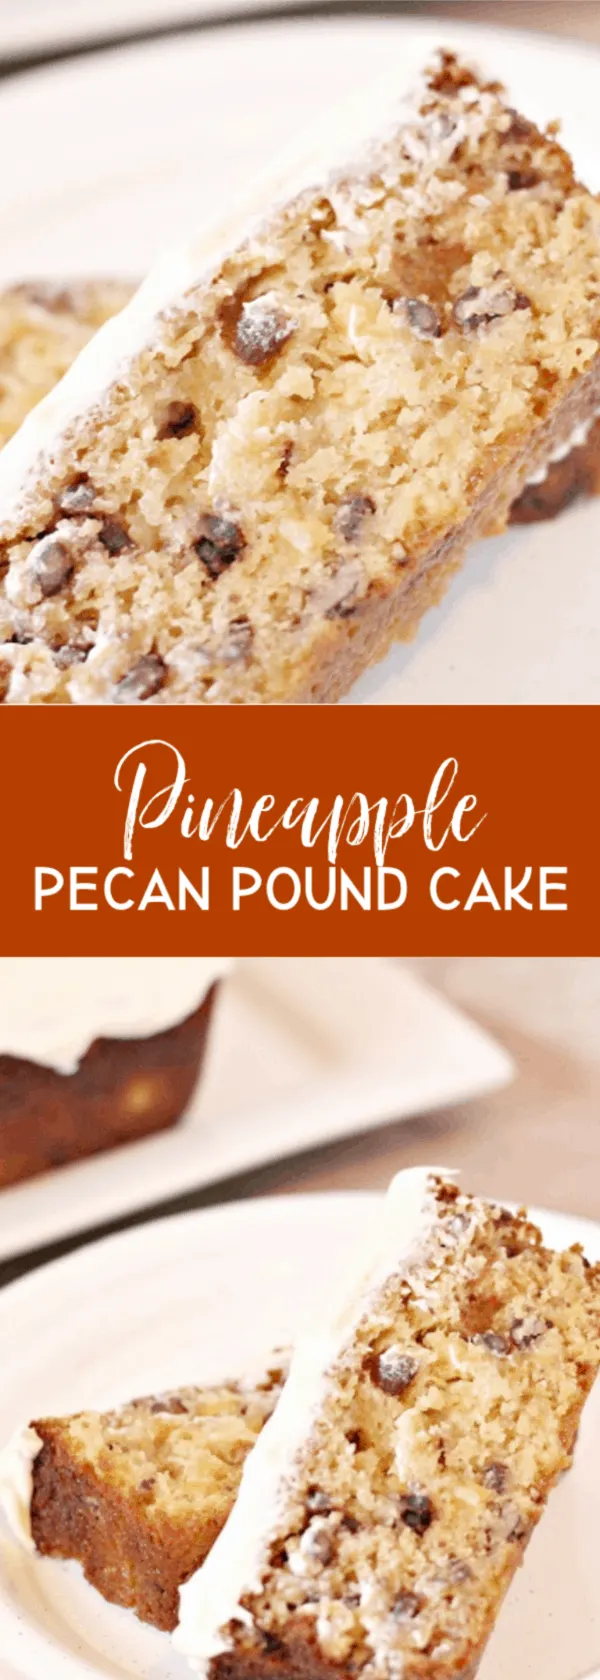 Flavorful and moist pineapple pecan pound cake with juicy, tart pineapple and crunchy pecans topped with a cream cheese frosting. via @Mooreorlesscook